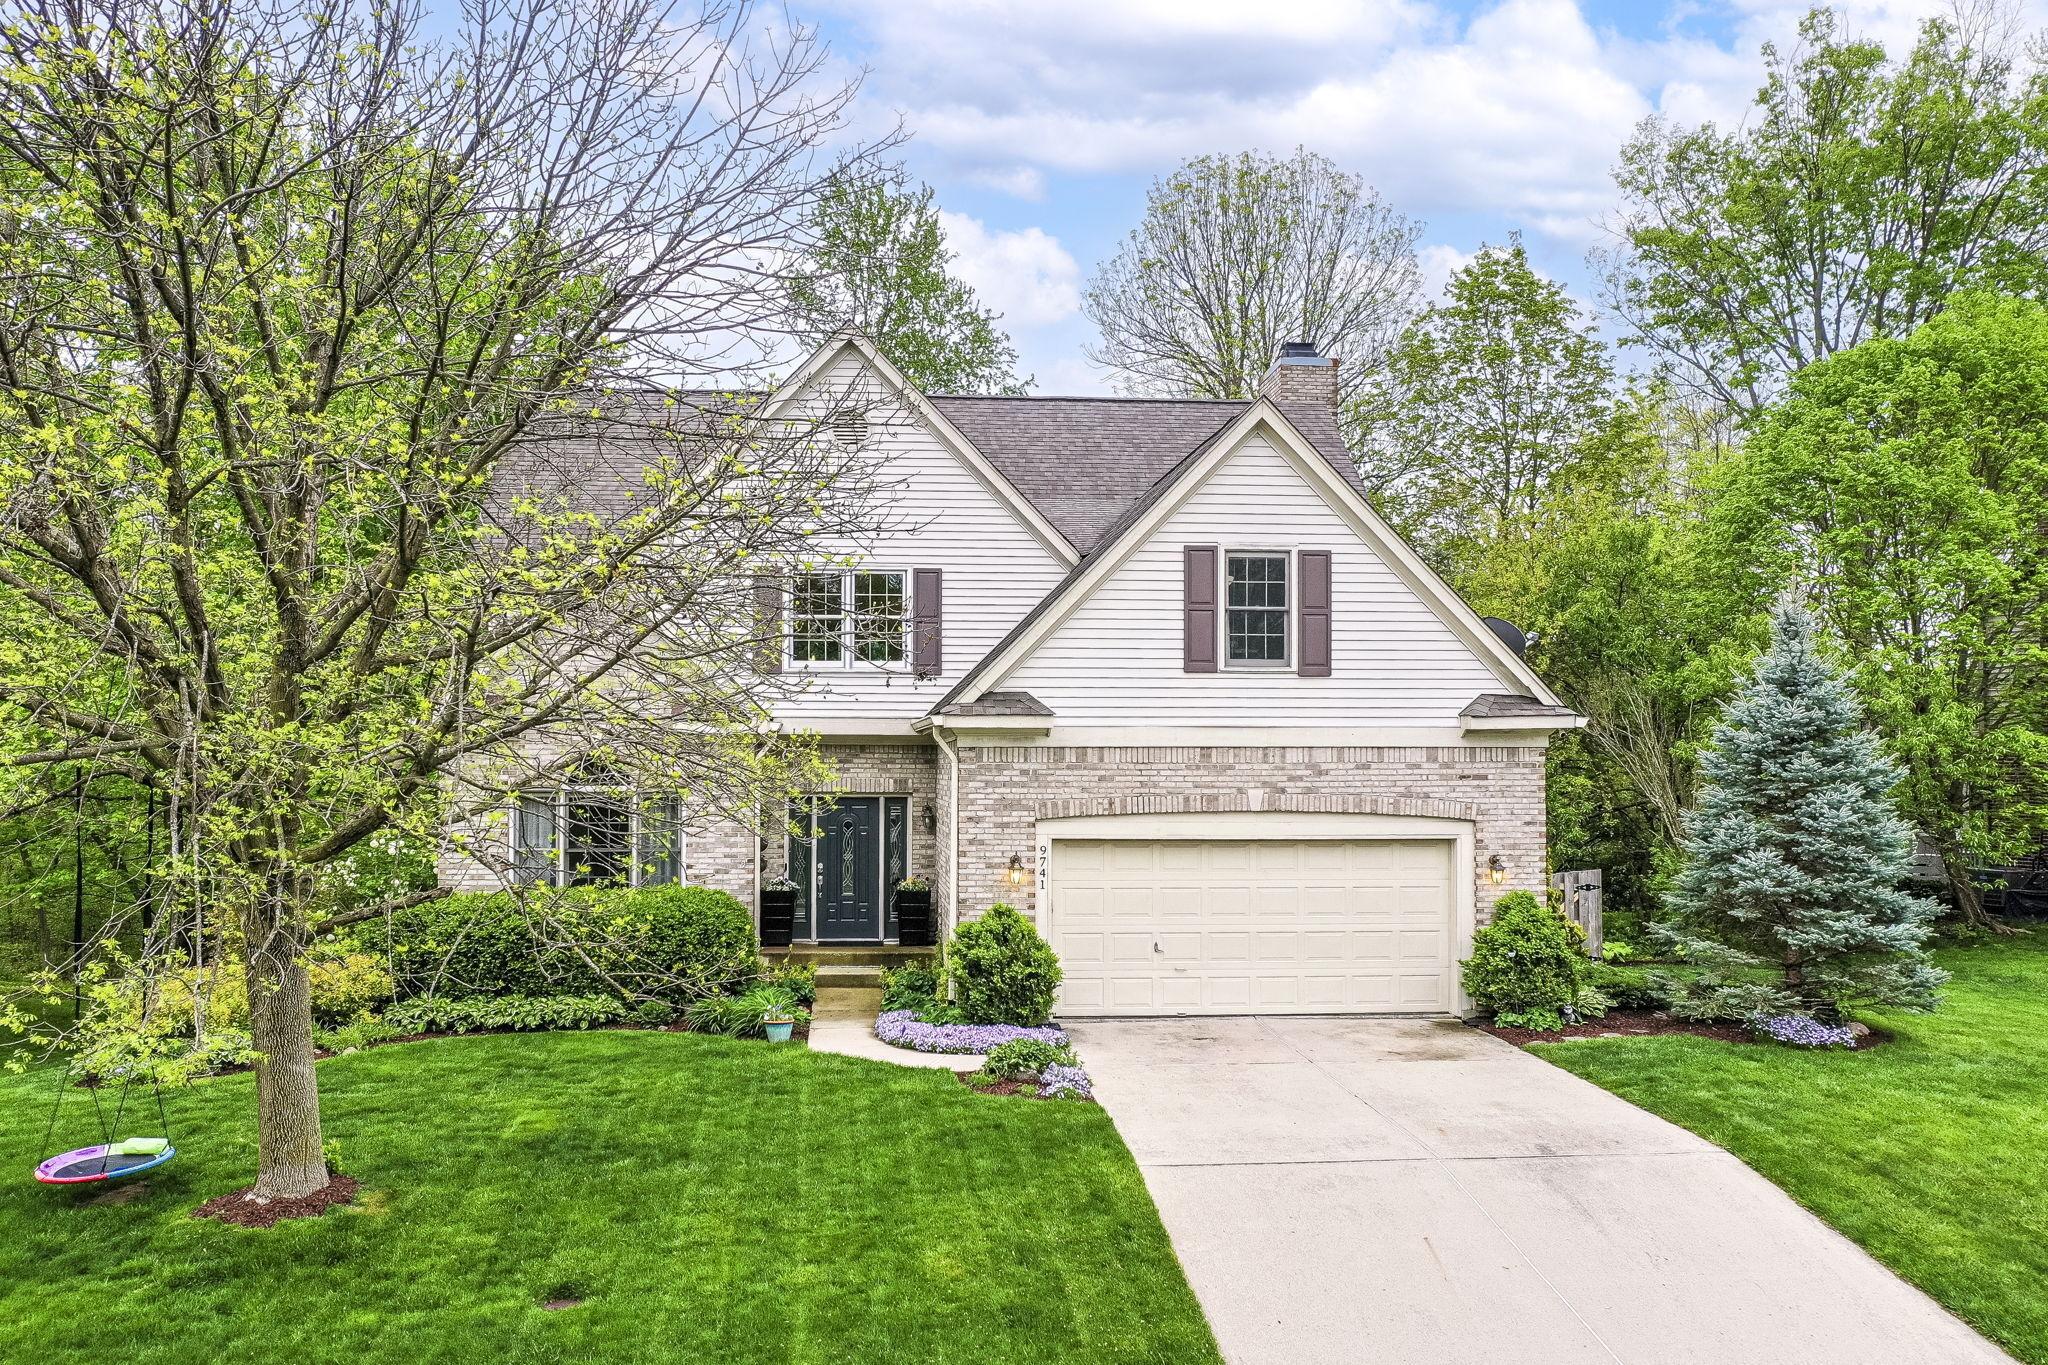 Photo one of 9741 Logan Ln Fishers IN 46037 | MLS 21964428